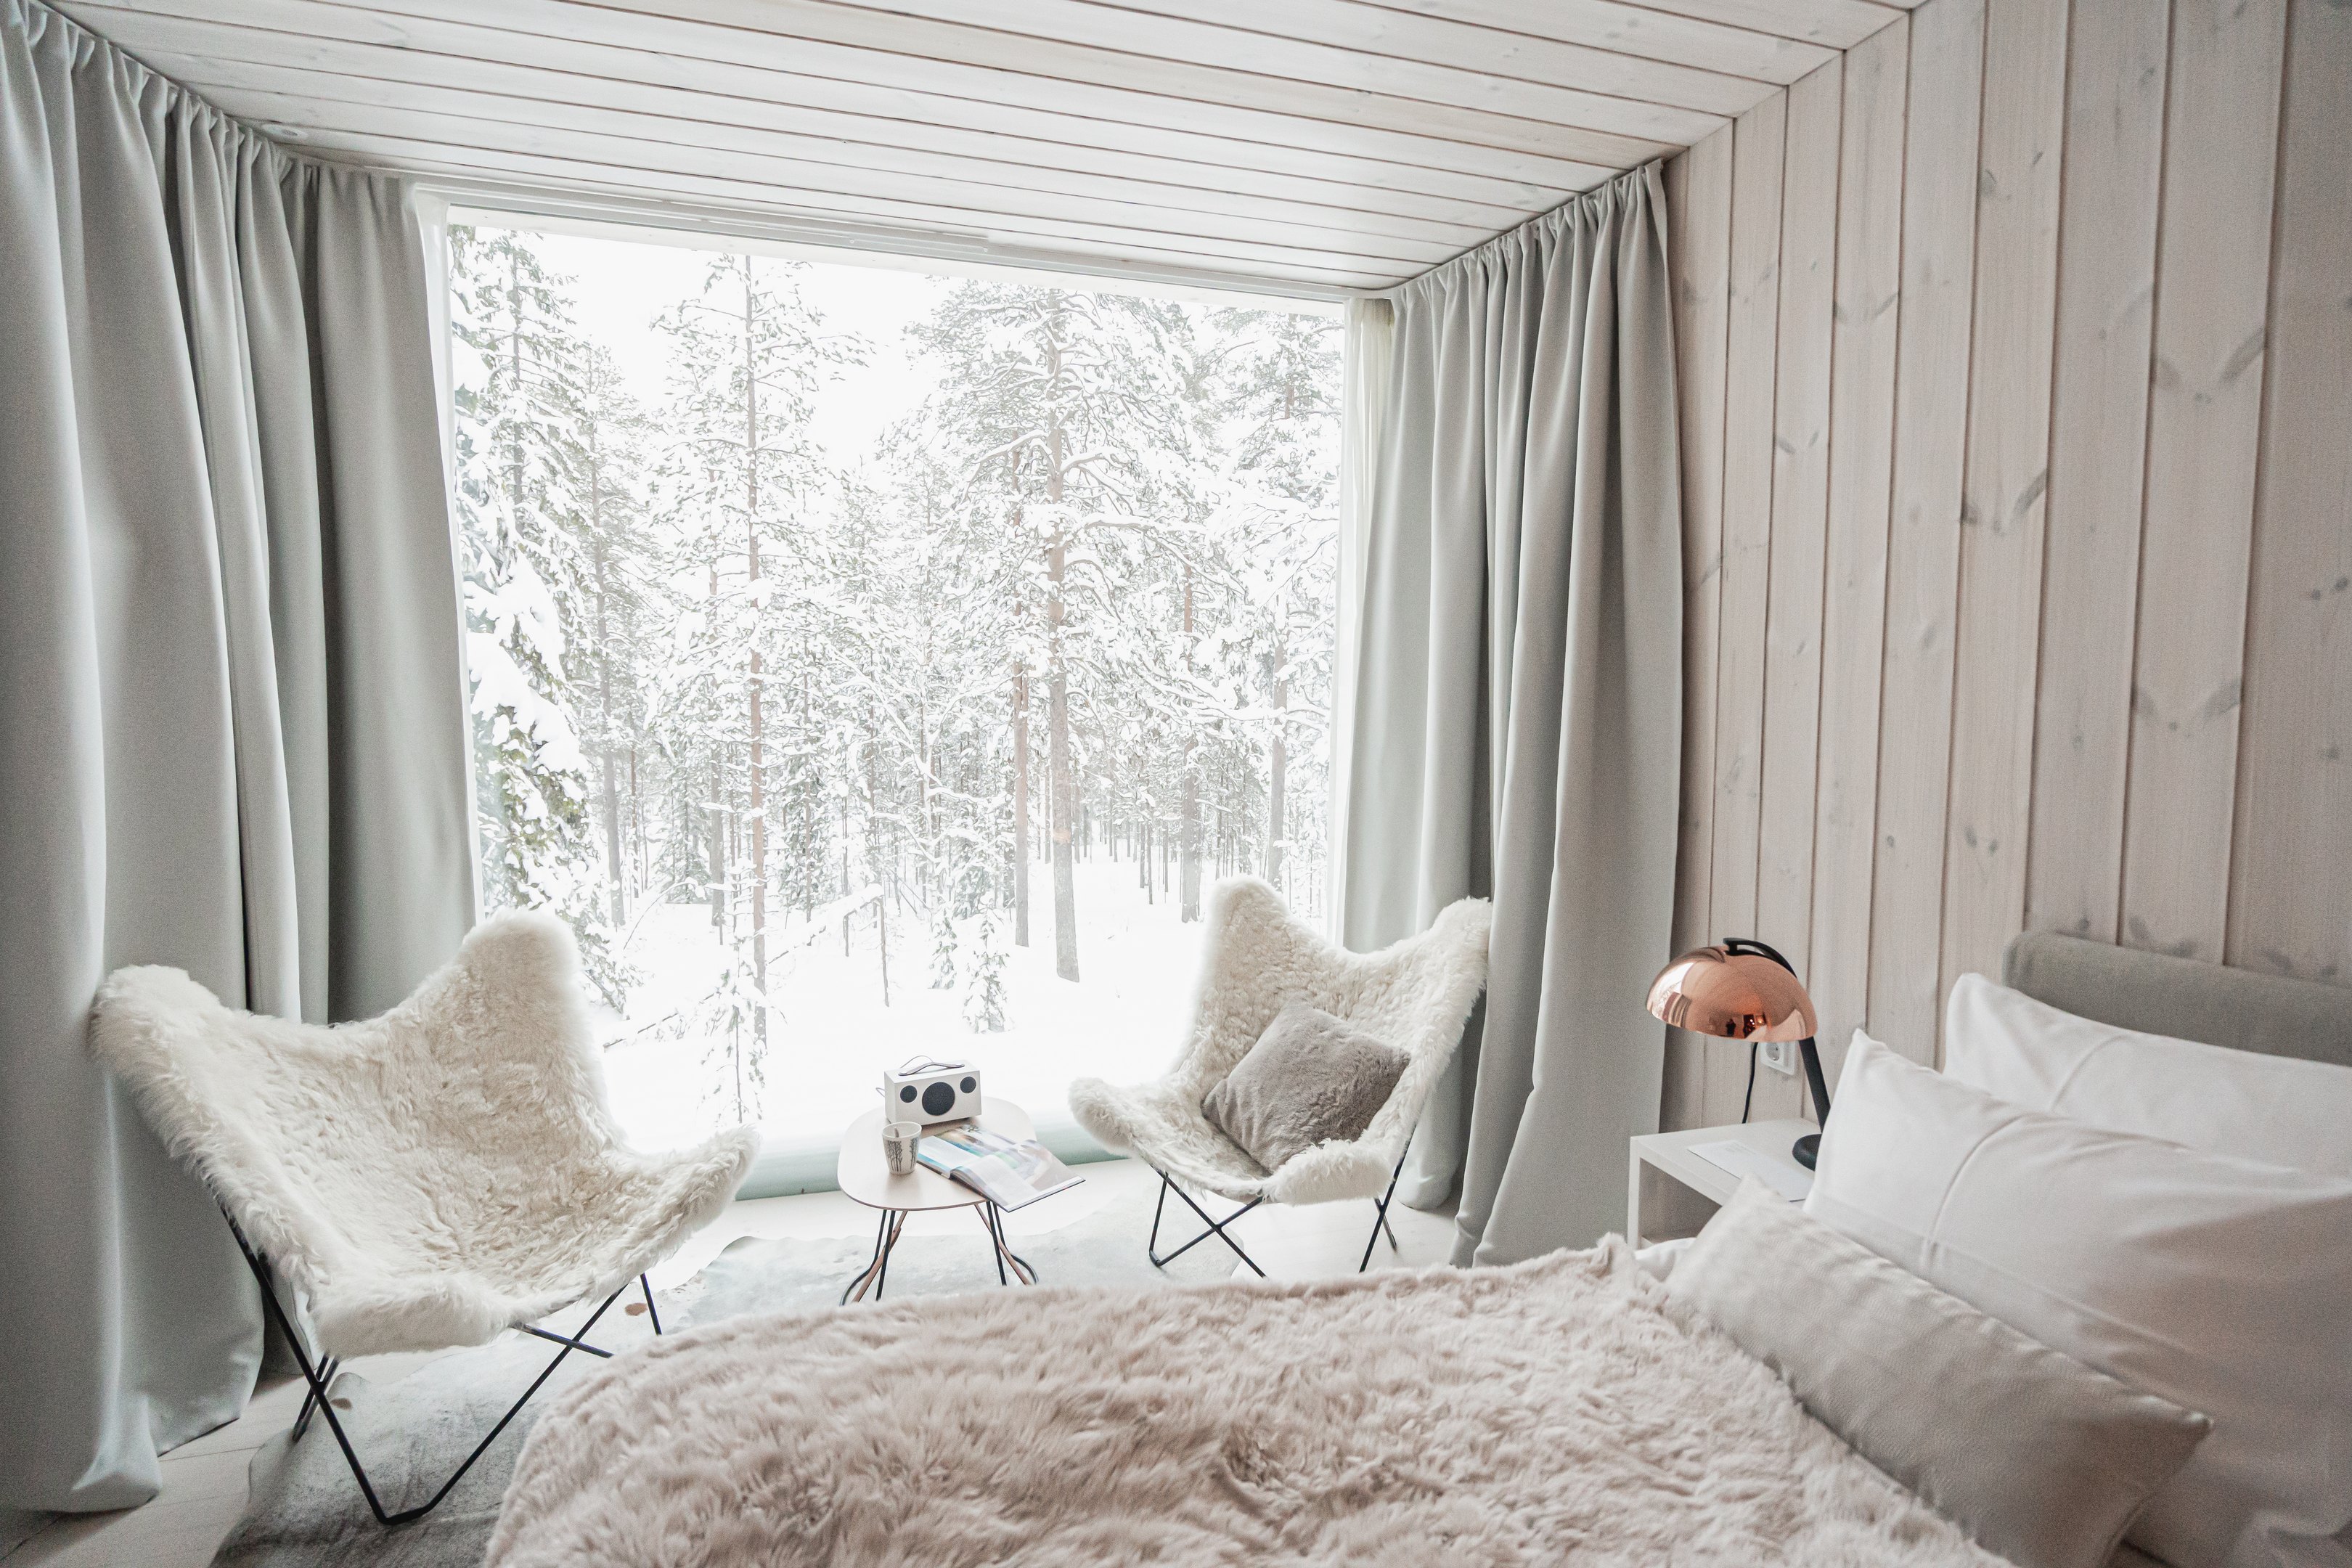 Arctic TreeHouse Suite in the winter in Finnish Lapland, Rovaniemi.